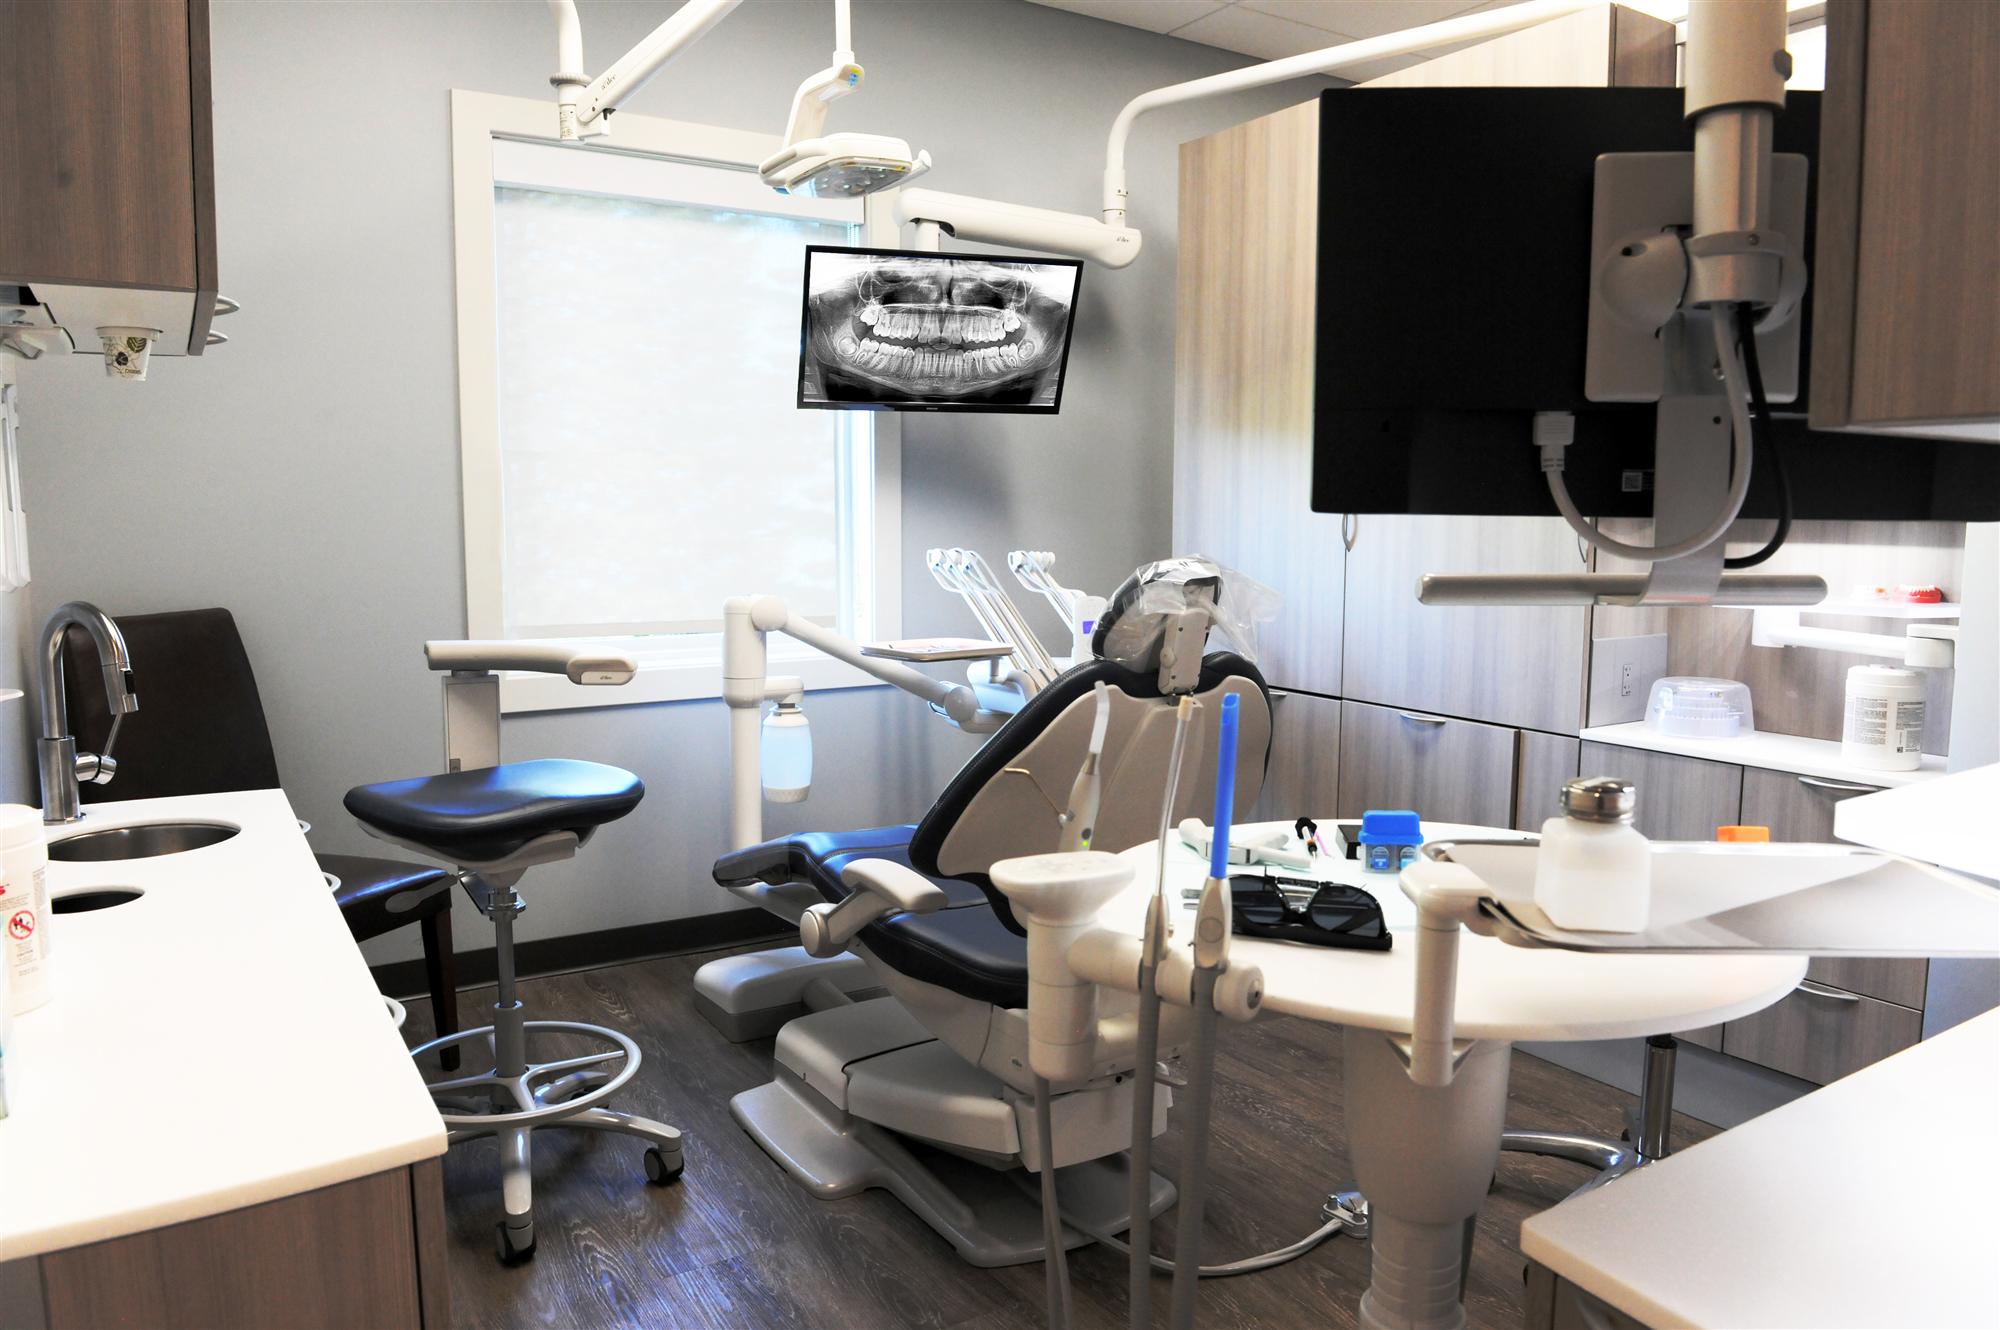 WI Dentist Treatment Room With Advanced Technology